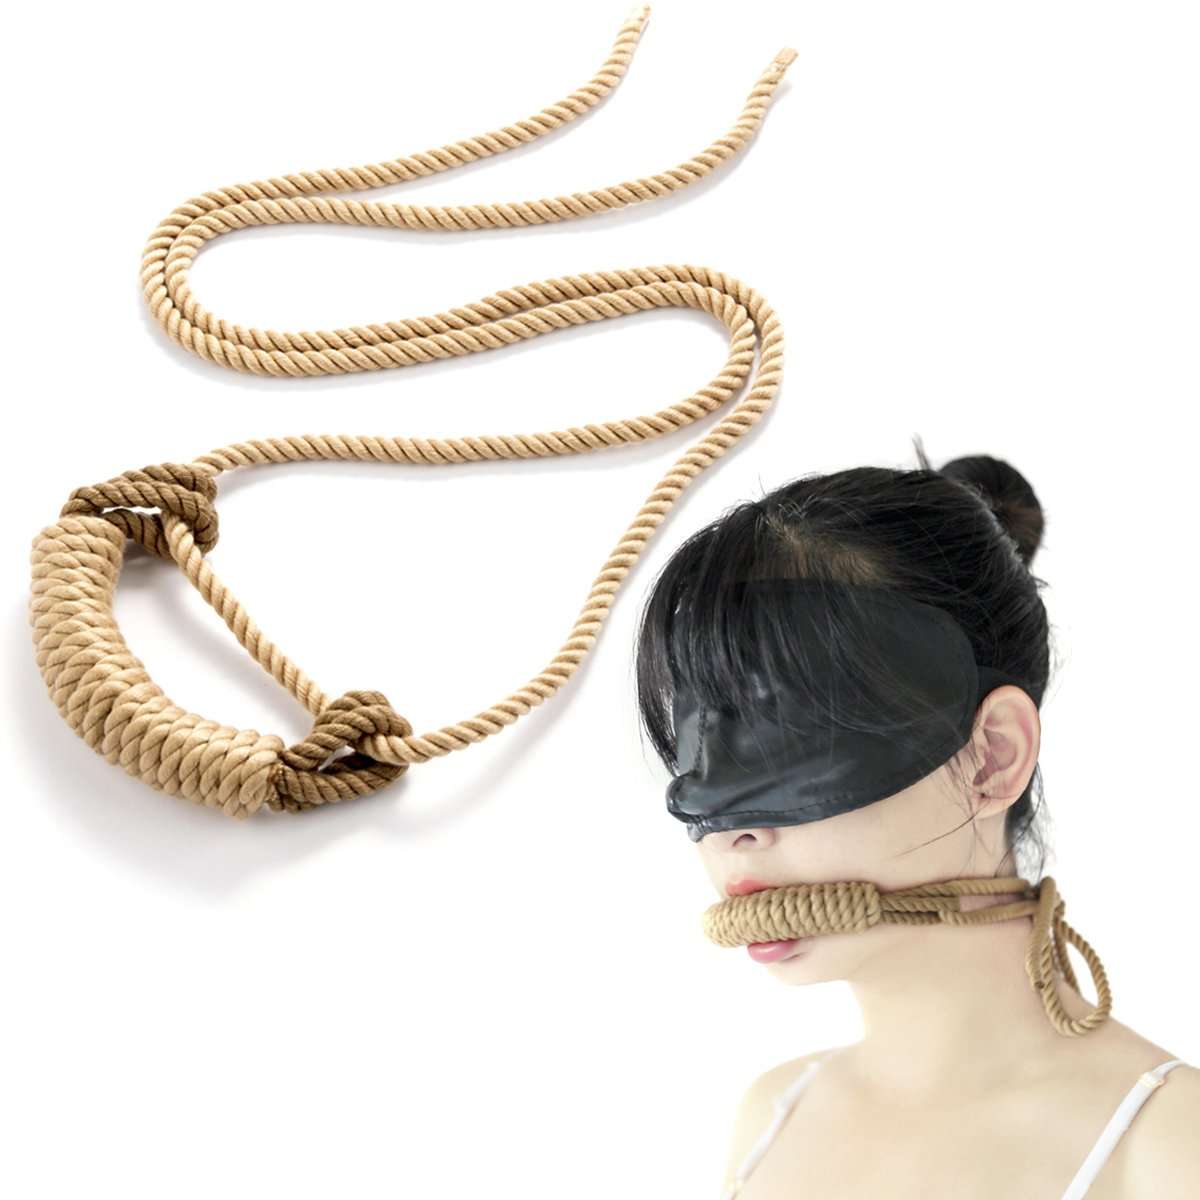 Mouth Gag - Want to Silence Your Submissive? Oxy-Shop